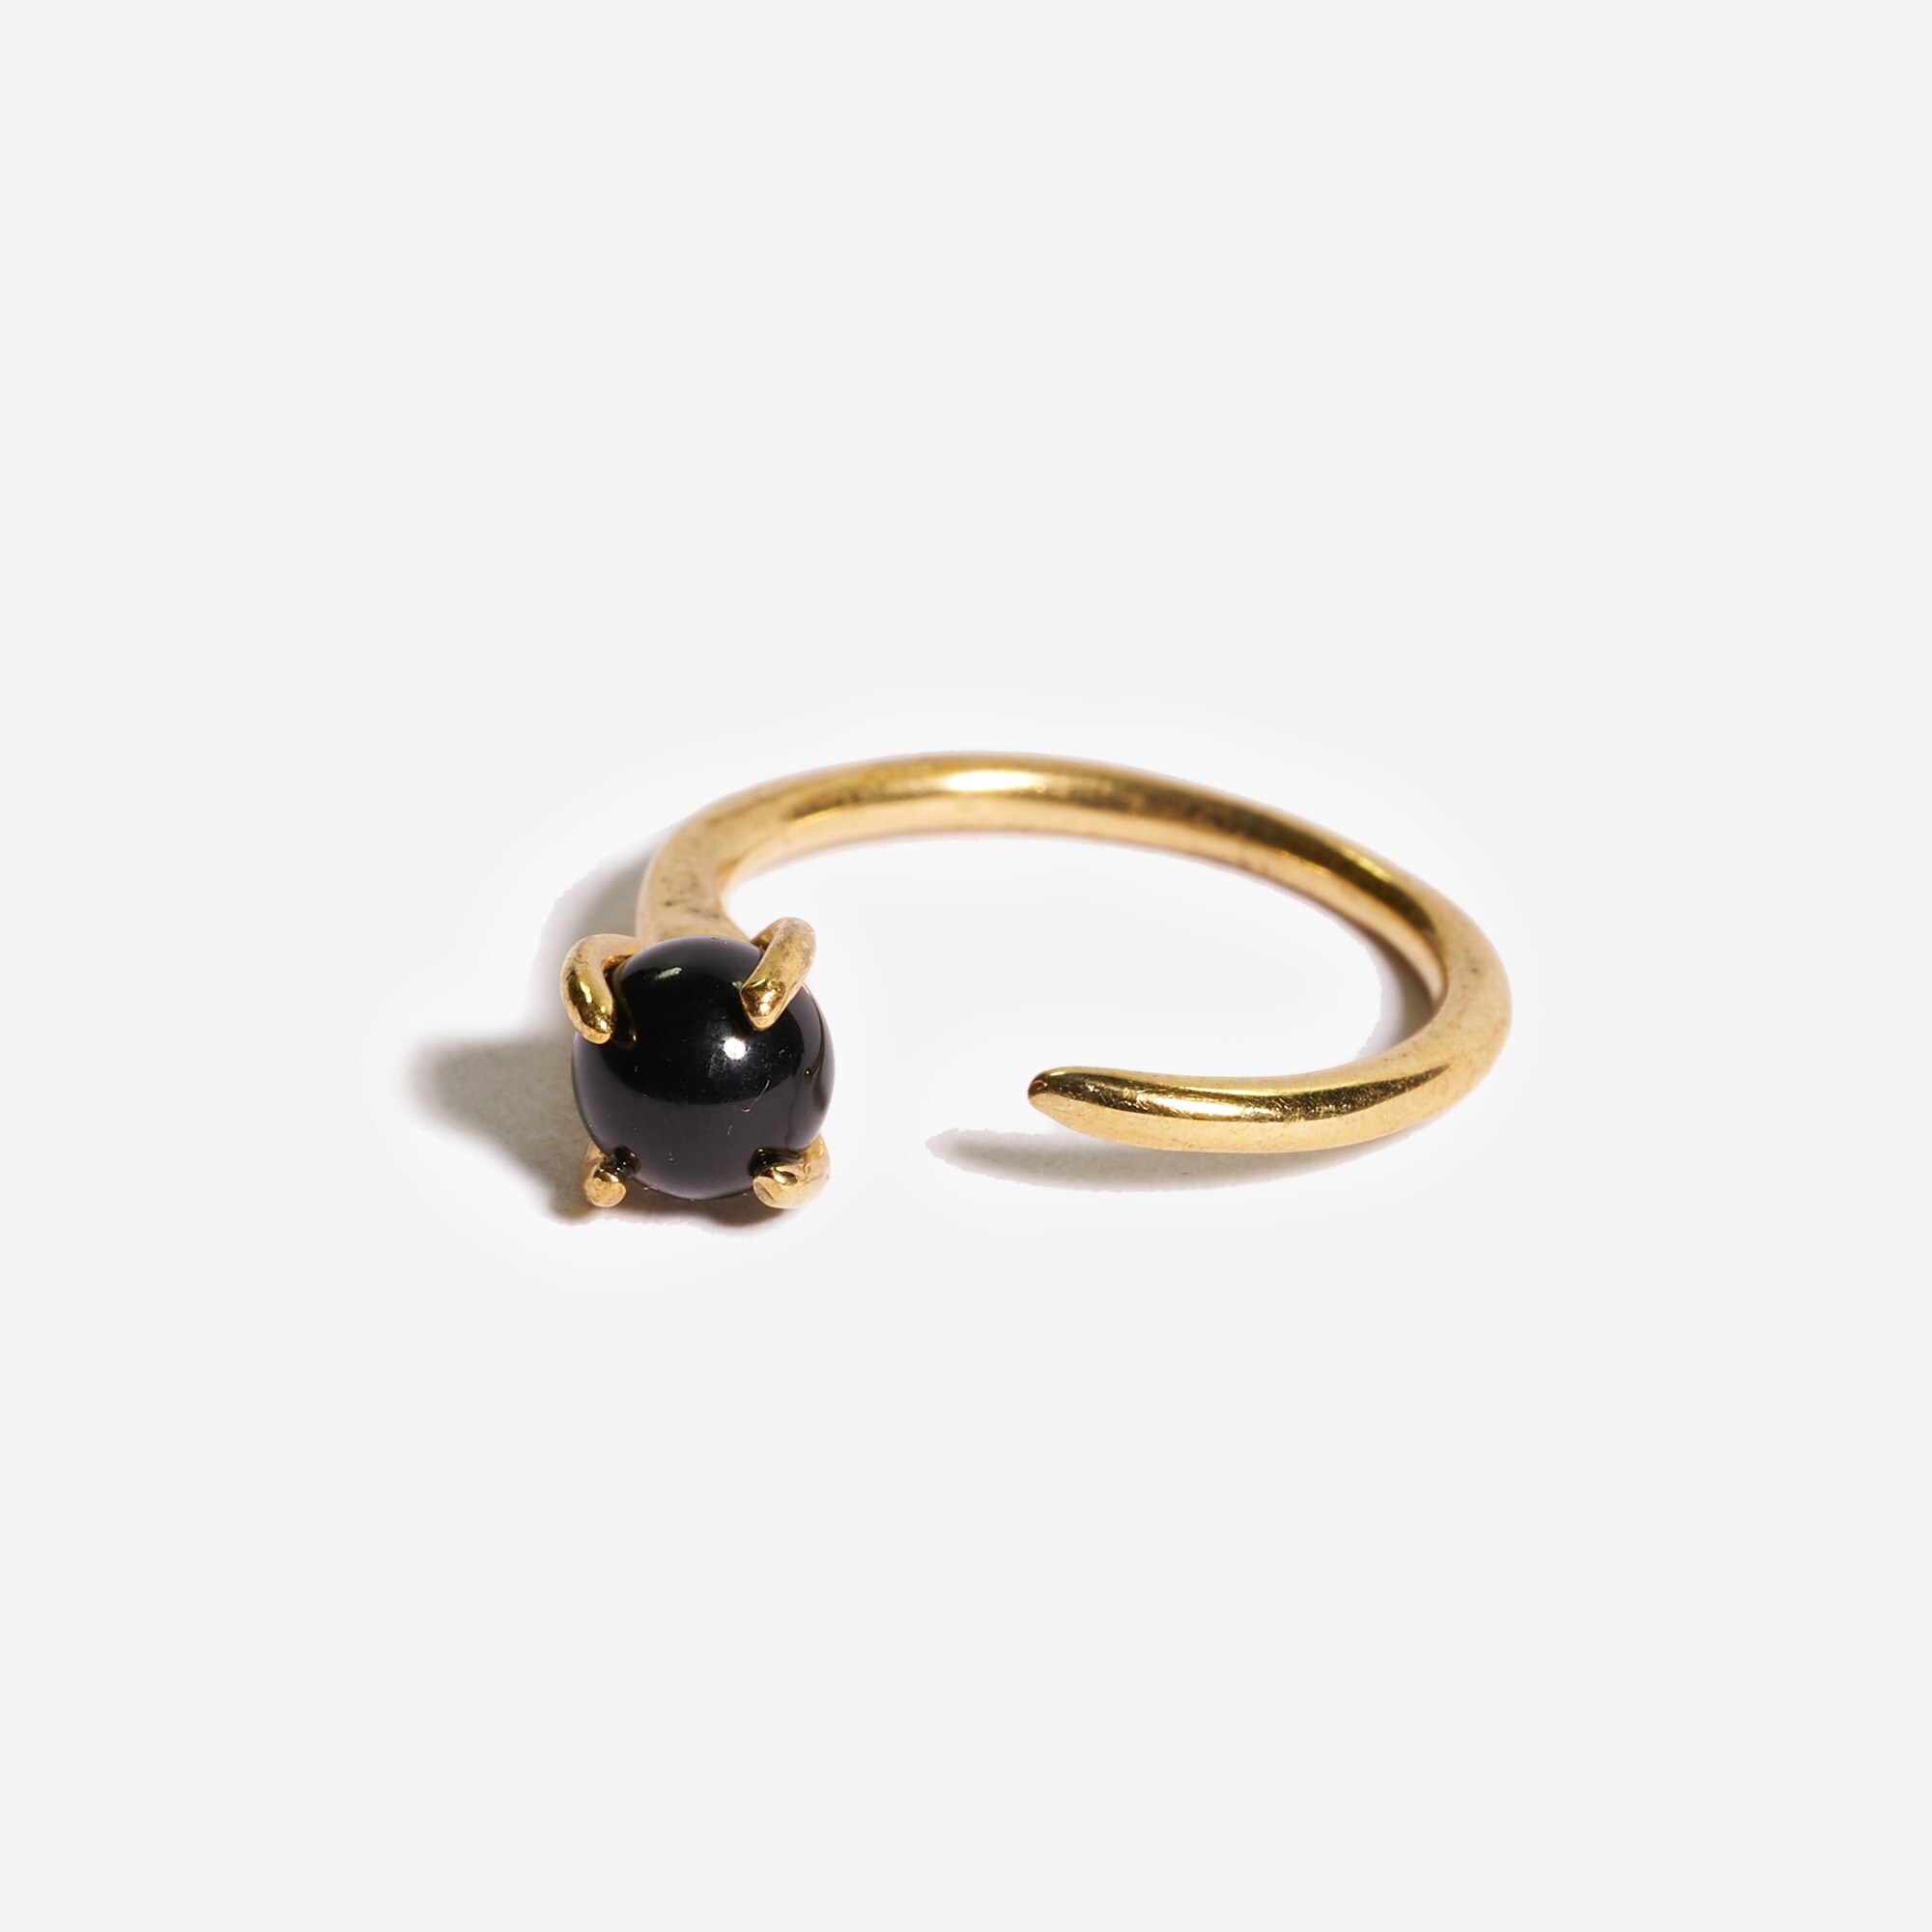  Odette New York® Klint ring with stone sphere